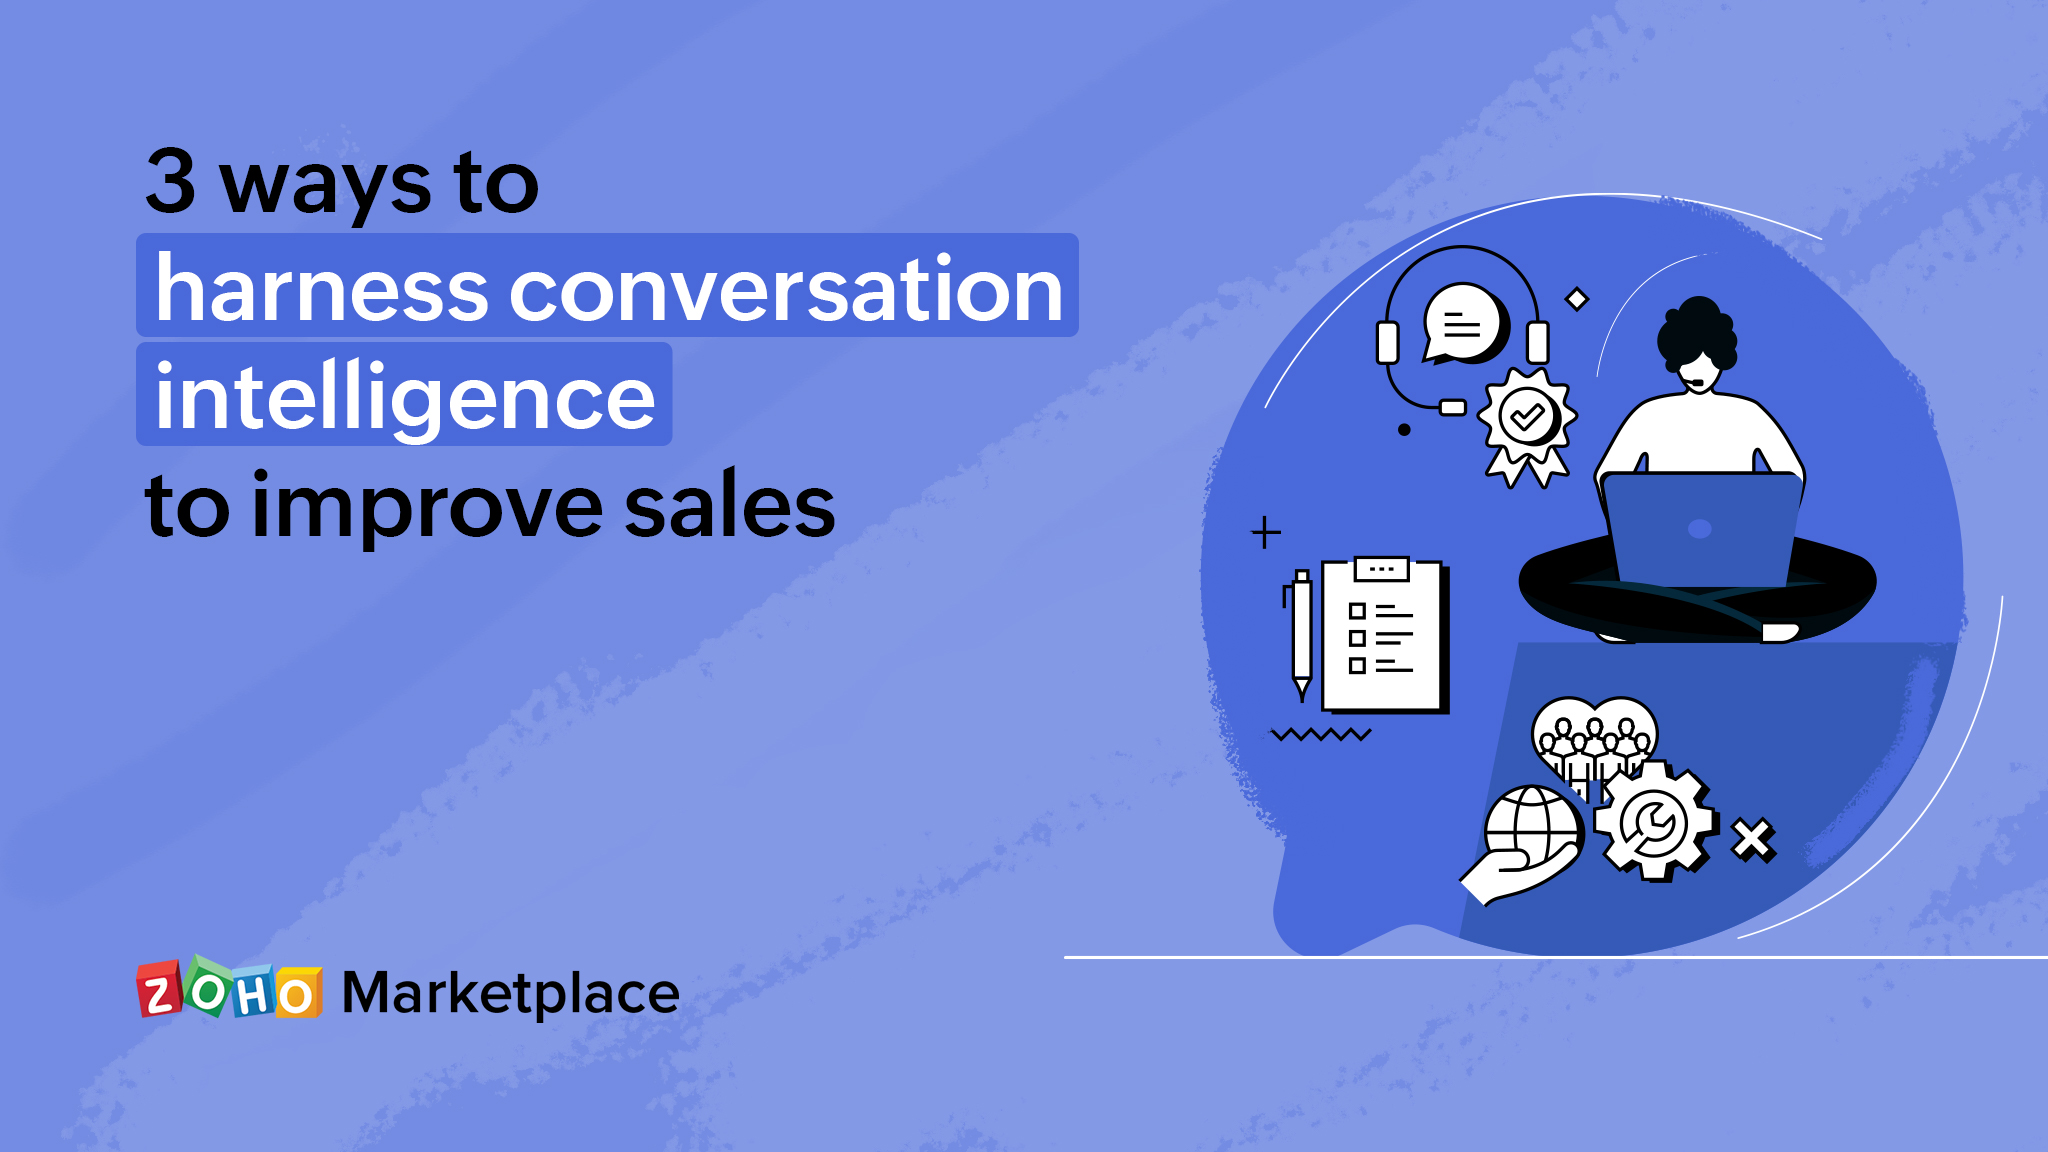 3 ways to harness conversation intelligence to improve sales